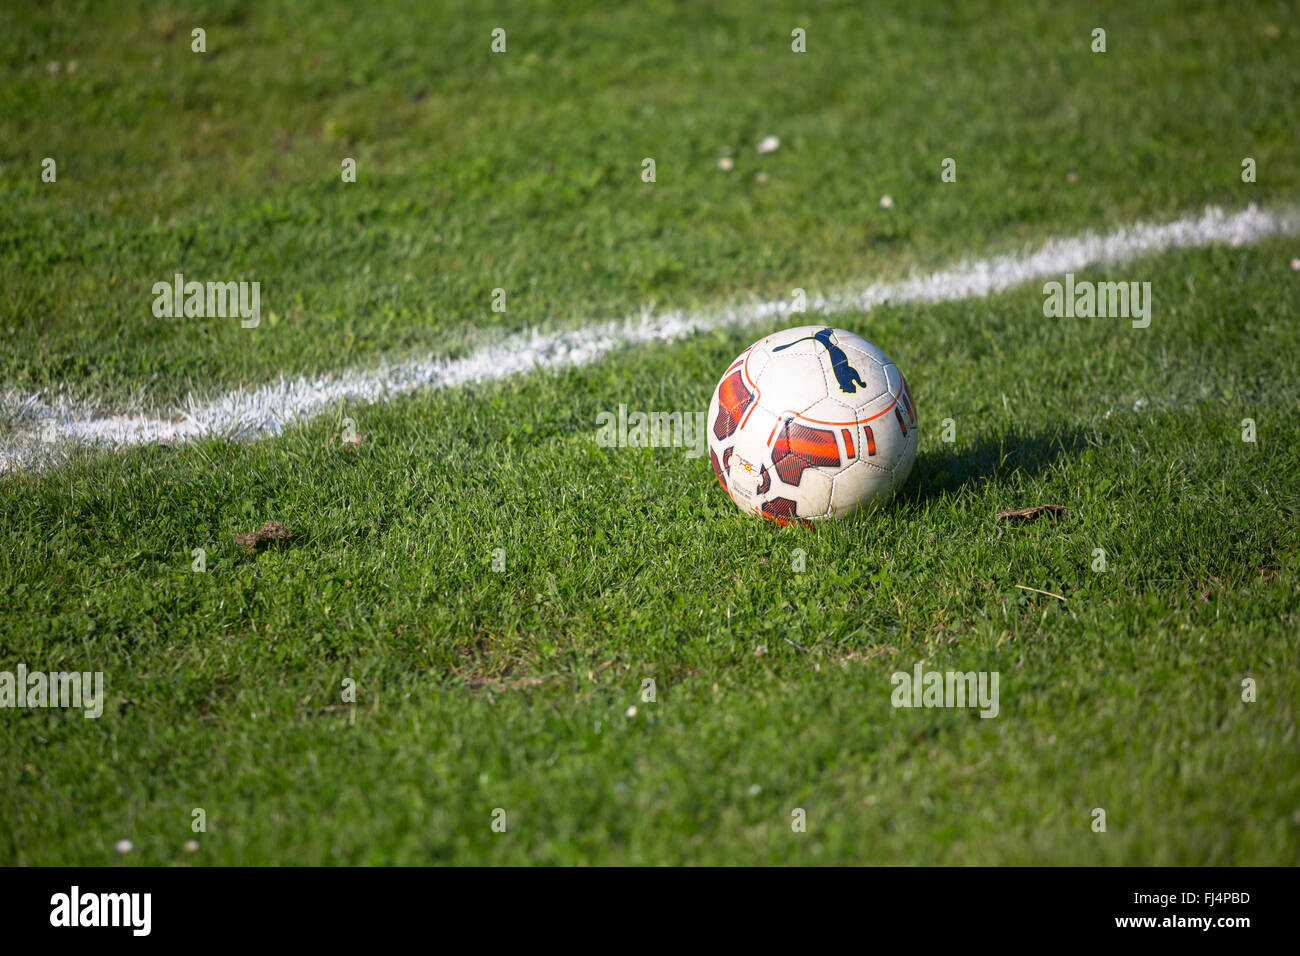 White soccer ball on a green grass soccer field with a white marking line Stock Photo